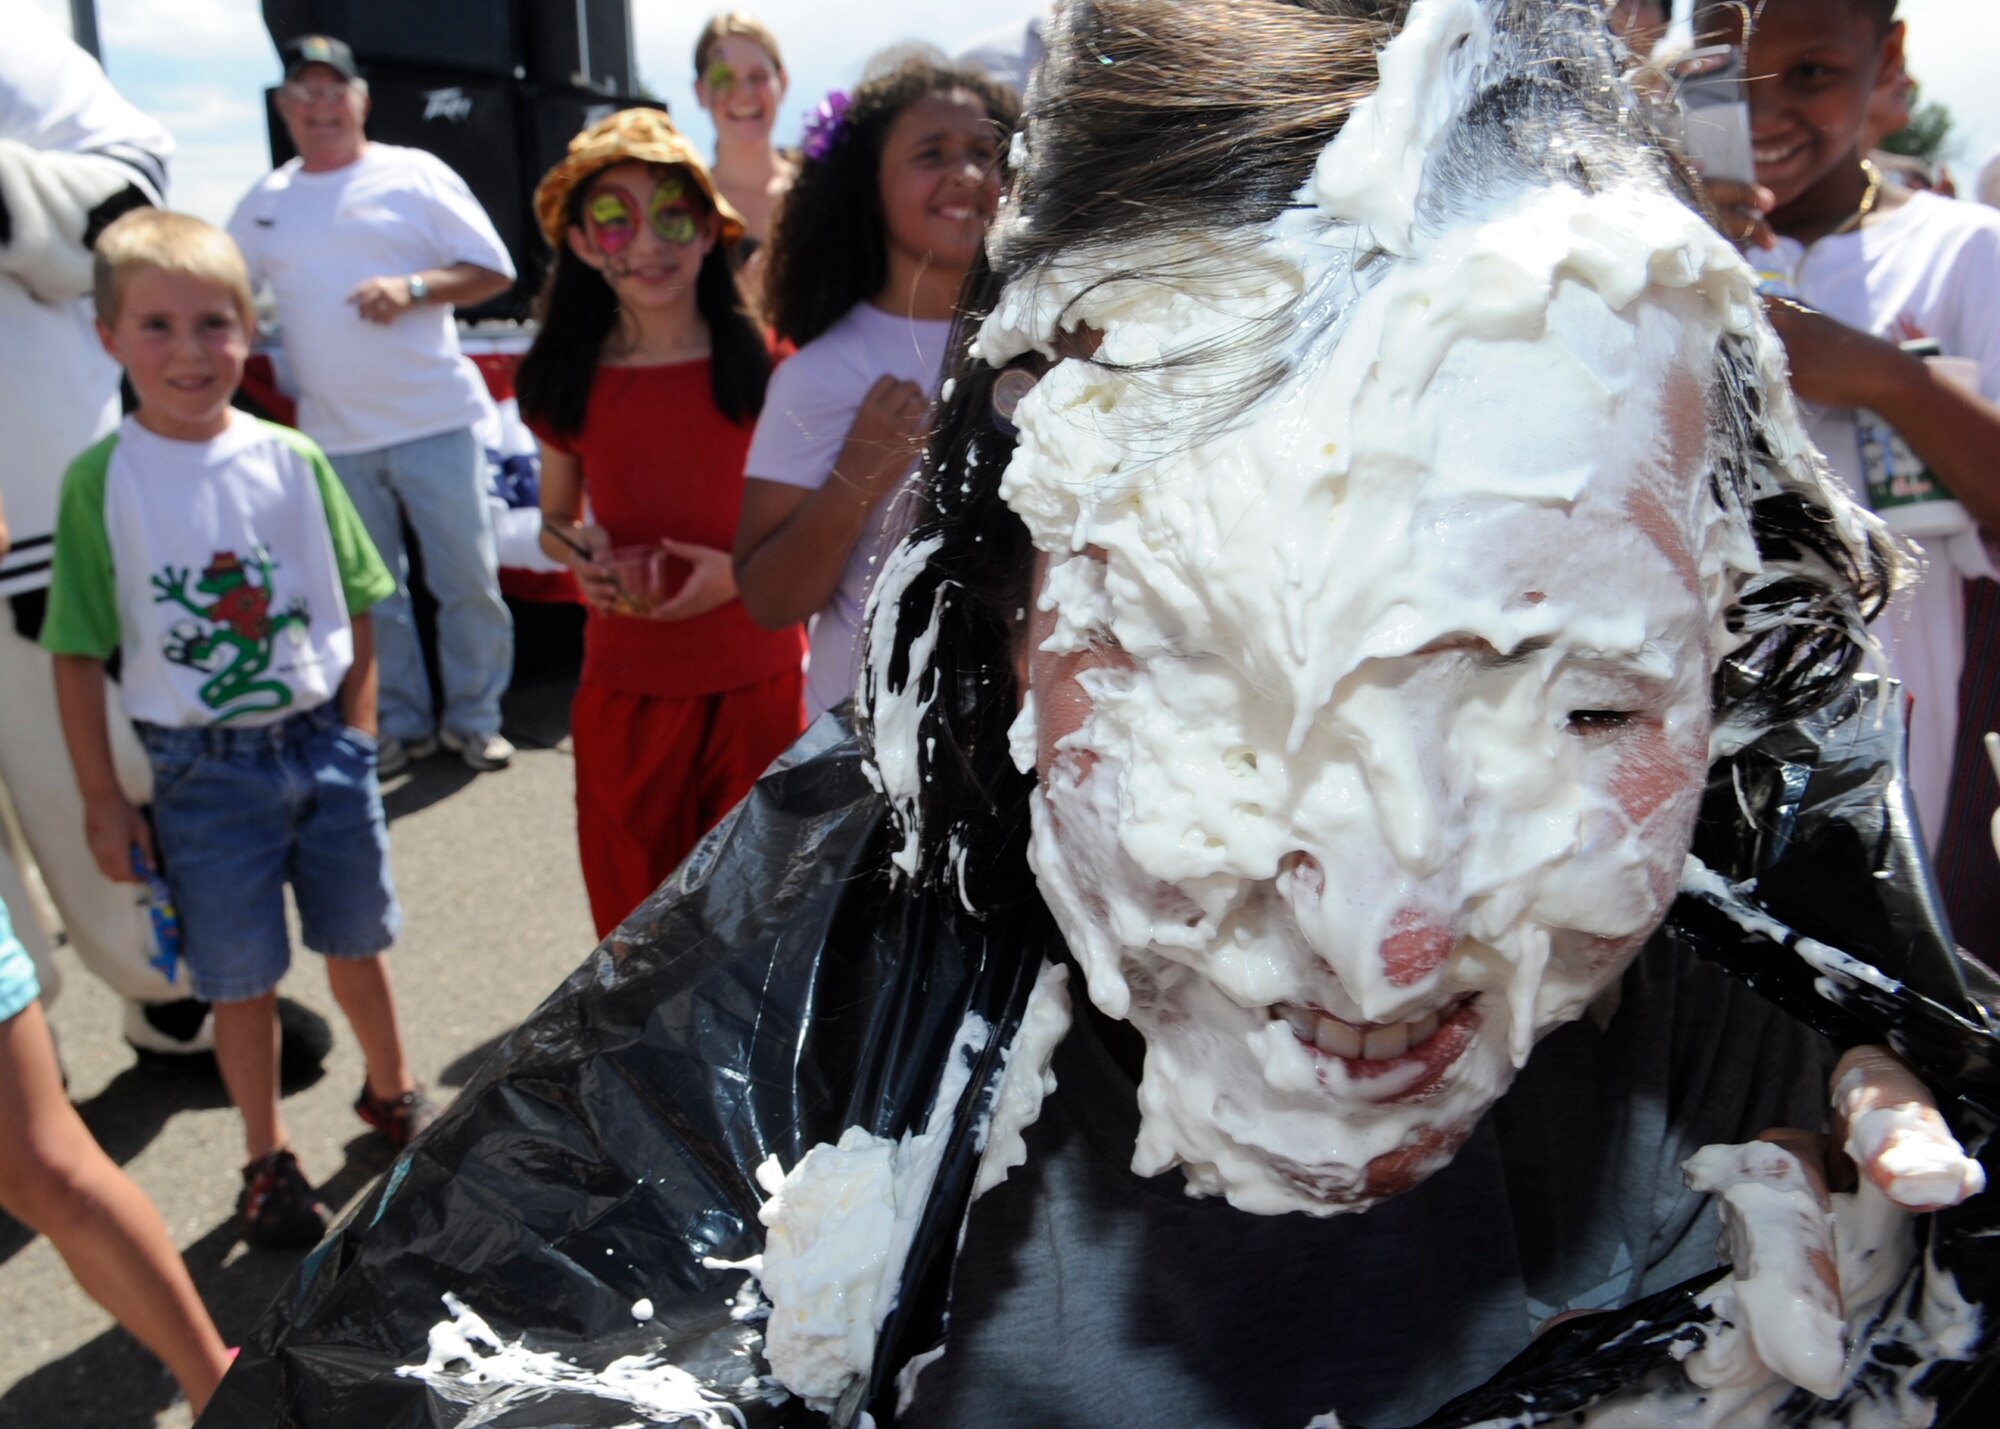 BUCKLEY AIR FORCE BASE, Colo. – Master Sgt. Deanna Snider, 460th Mission Support Group first sergeant takes a pie to the face to support Airmen Against Drunk Driving during Freedom Fest here, July 1.  The celebration included food, events for children and a live band. (U.S. Air Force photo by Tech. Sgt. Jeromy Cross)